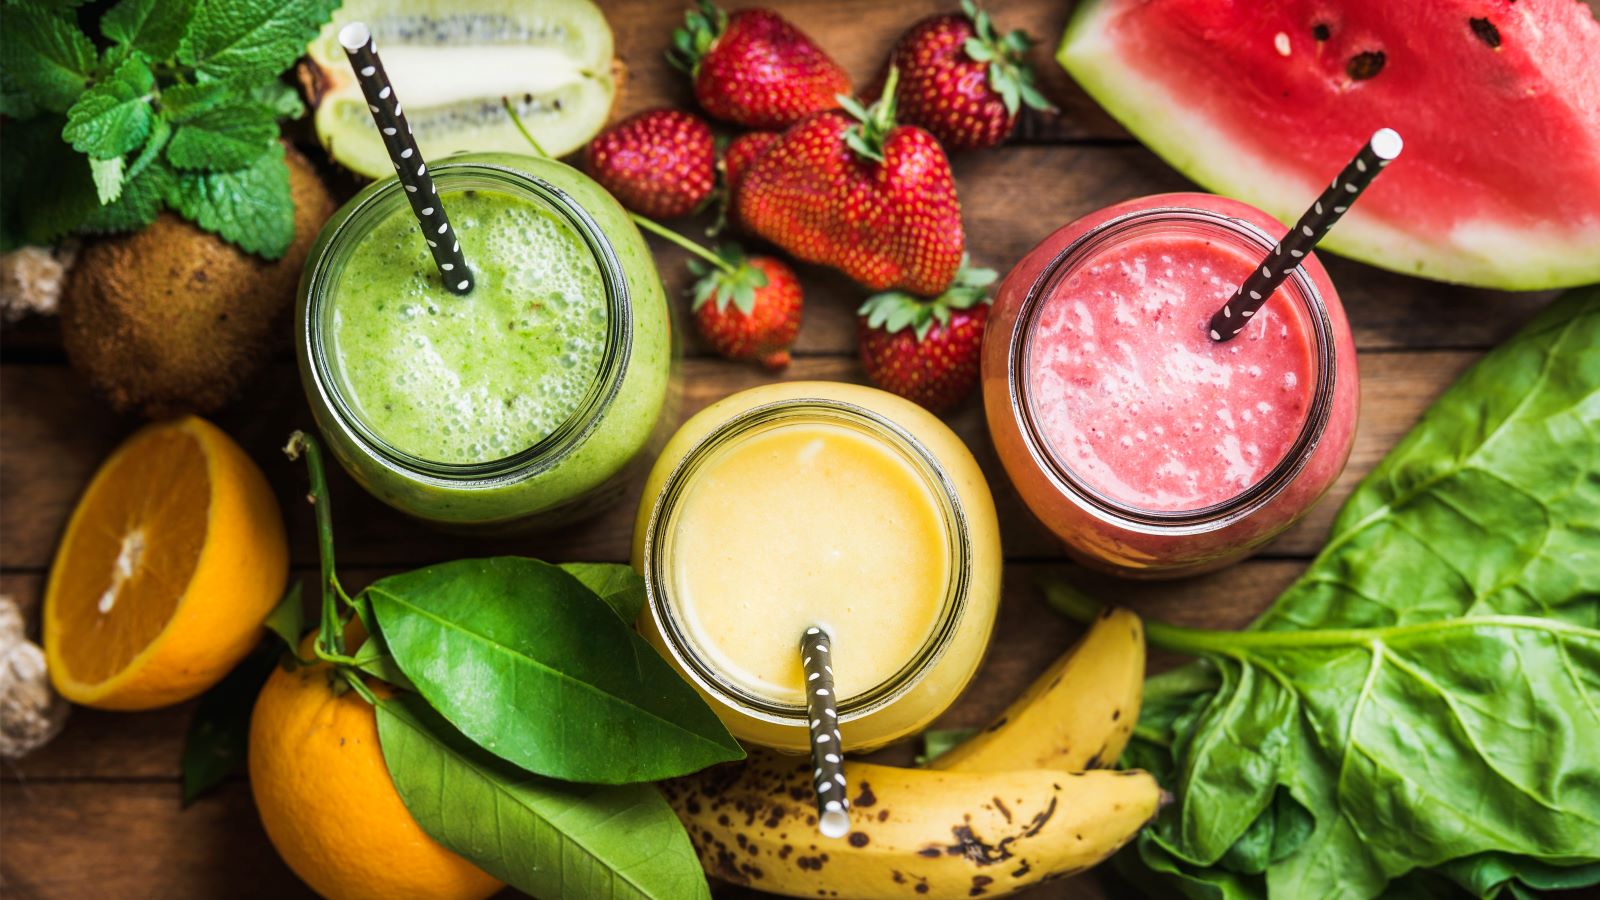 4 Ingredients That Can Supercharge Your Smoothie